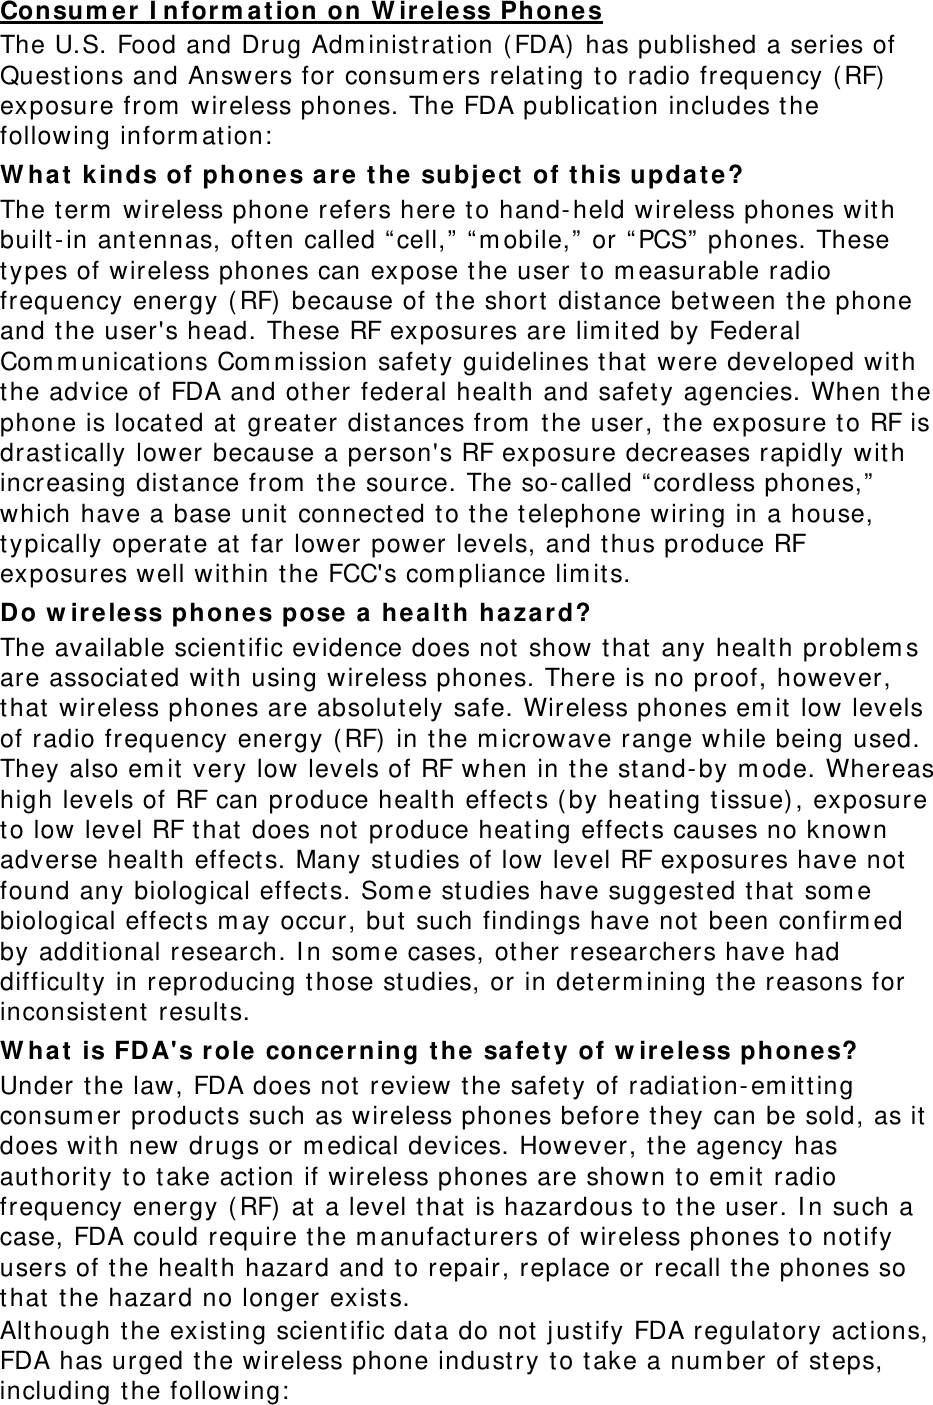 Consum er I nfor m a t ion on W irele ss Phones The U.S. Food and Drug Adm inist rat ion ( FDA)  has published a series of Quest ions and Answers for consum ers relat ing t o radio frequency ( RF)  exposure from  wireless phones. The FDA publicat ion includes the following inform at ion:  W hat  k inds of phone s are t h e  subj e ct  of t his updat e ? The t erm  wireless phone refers here t o hand- held wireless phones wit h built- in antennas, often called “ cell,” “ m obile,” or “ PCS”  phones. These types of wireless phones can expose t he user to m easurable radio frequency energy ( RF)  because of the short  distance bet ween t he phone and t he user&apos;s head. These RF exposures are lim it ed by Federal Com m unications Com m ission safet y guidelines t hat  were developed wit h the advice of FDA and other federal healt h and safety agencies. When the phone is locat ed at  great er dist ances from  t he user, t he exposure to RF is drast ically lower because a person&apos;s RF exposure decreases rapidly with increasing dist ance from  t he source. The so- called “ cordless phones,” which have a base unit  connect ed t o the t elephone wiring in a house, typically operate at  far lower power levels, and t hus produce RF exposures well wit hin the FCC&apos;s com pliance lim it s. Do w ir e le ss phon e s pose a healt h ha zard? The available scient ific evidence does not  show t hat any healt h problem s are associat ed wit h using wireless phones. There is no proof, however, that  wireless phones are absolut ely safe. Wireless phones em it  low levels of radio frequency energy ( RF)  in the m icrowave range while being used. They also em it  very low levels of RF when in t he st and- by m ode. Whereas high levels of RF can produce healt h effect s ( by heating t issue) , exposure to low level RF t hat  does not  produce heat ing effect s causes no known adverse healt h effect s. Many st udies of low level RF exposures have not  found any biological effects. Som e st udies have suggested t hat  som e biological effect s m ay occur, but  such findings have not  been confirm ed by addit ional research. I n som e cases, ot her researchers have had difficult y in reproducing t hose st udies, or in det erm ining t he reasons for inconsist ent result s. W hat  is FDA&apos;s r ole concerning t he sa fet y of w ir e le ss phon e s? Under the law, FDA does not review t he safety of radiation- em itt ing consum er product s such as wireless phones before they can be sold, as it  does wit h new drugs or m edical devices. However, t he agency has aut horit y t o take act ion if wireless phones are shown t o em it  radio frequency energy ( RF)  at  a level t hat  is hazardous t o the user. I n such a case, FDA could require t he m anufacturers of wireless phones t o notify users of t he healt h hazard and t o repair, replace or recall t he phones so that  the hazard no longer exist s. Although the exist ing scient ific dat a do not  j ust ify FDA regulatory act ions, FDA has urged t he wireless phone indust ry t o t ake a num ber of st eps, including t he following:  